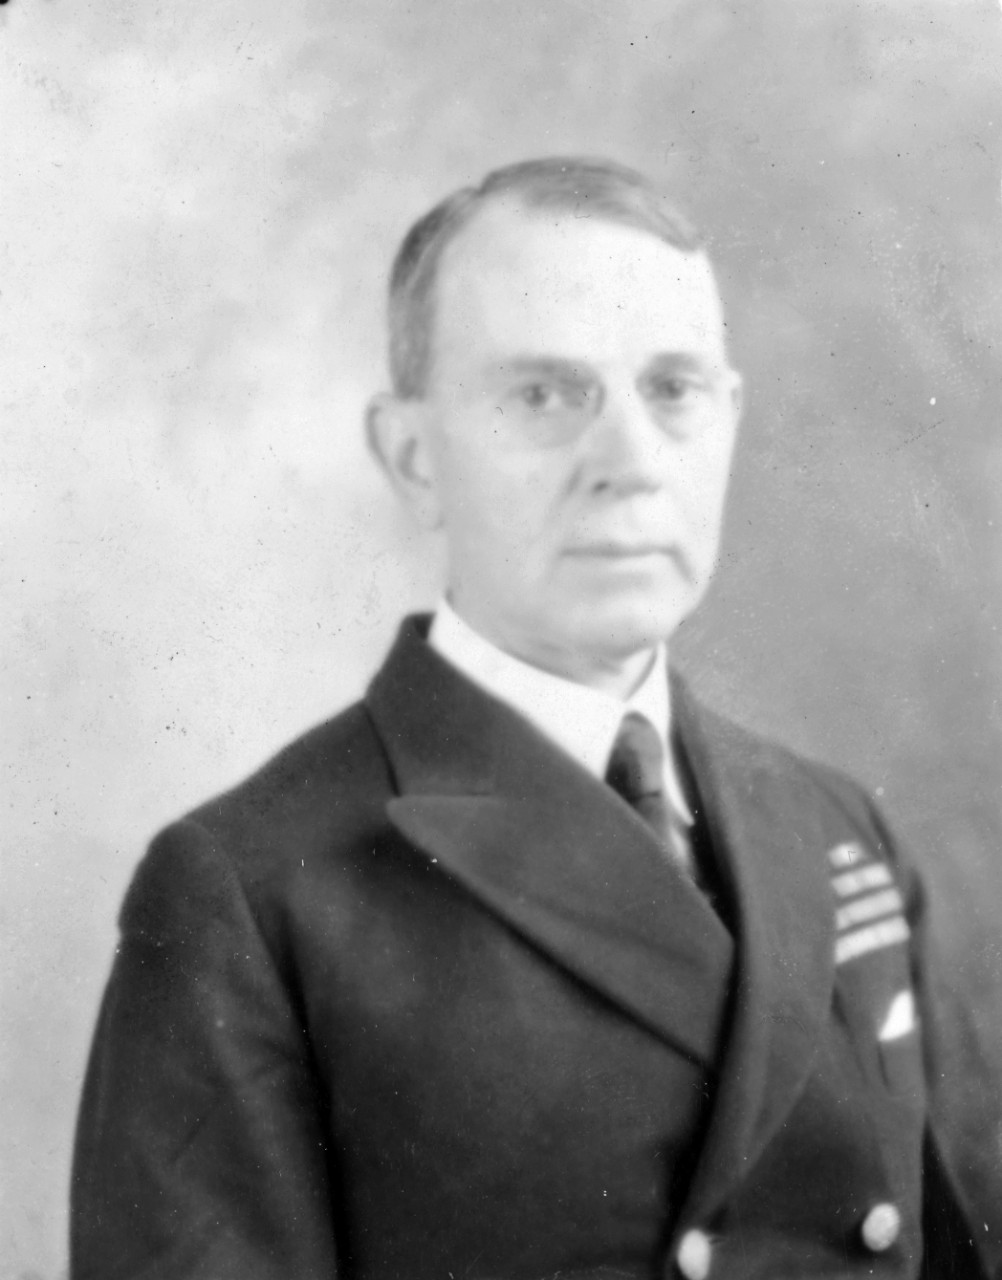 Captain Dudley W. Knox, USN, taken while he was officer in charge of the Office of Naval Records and the Navy Department Library.